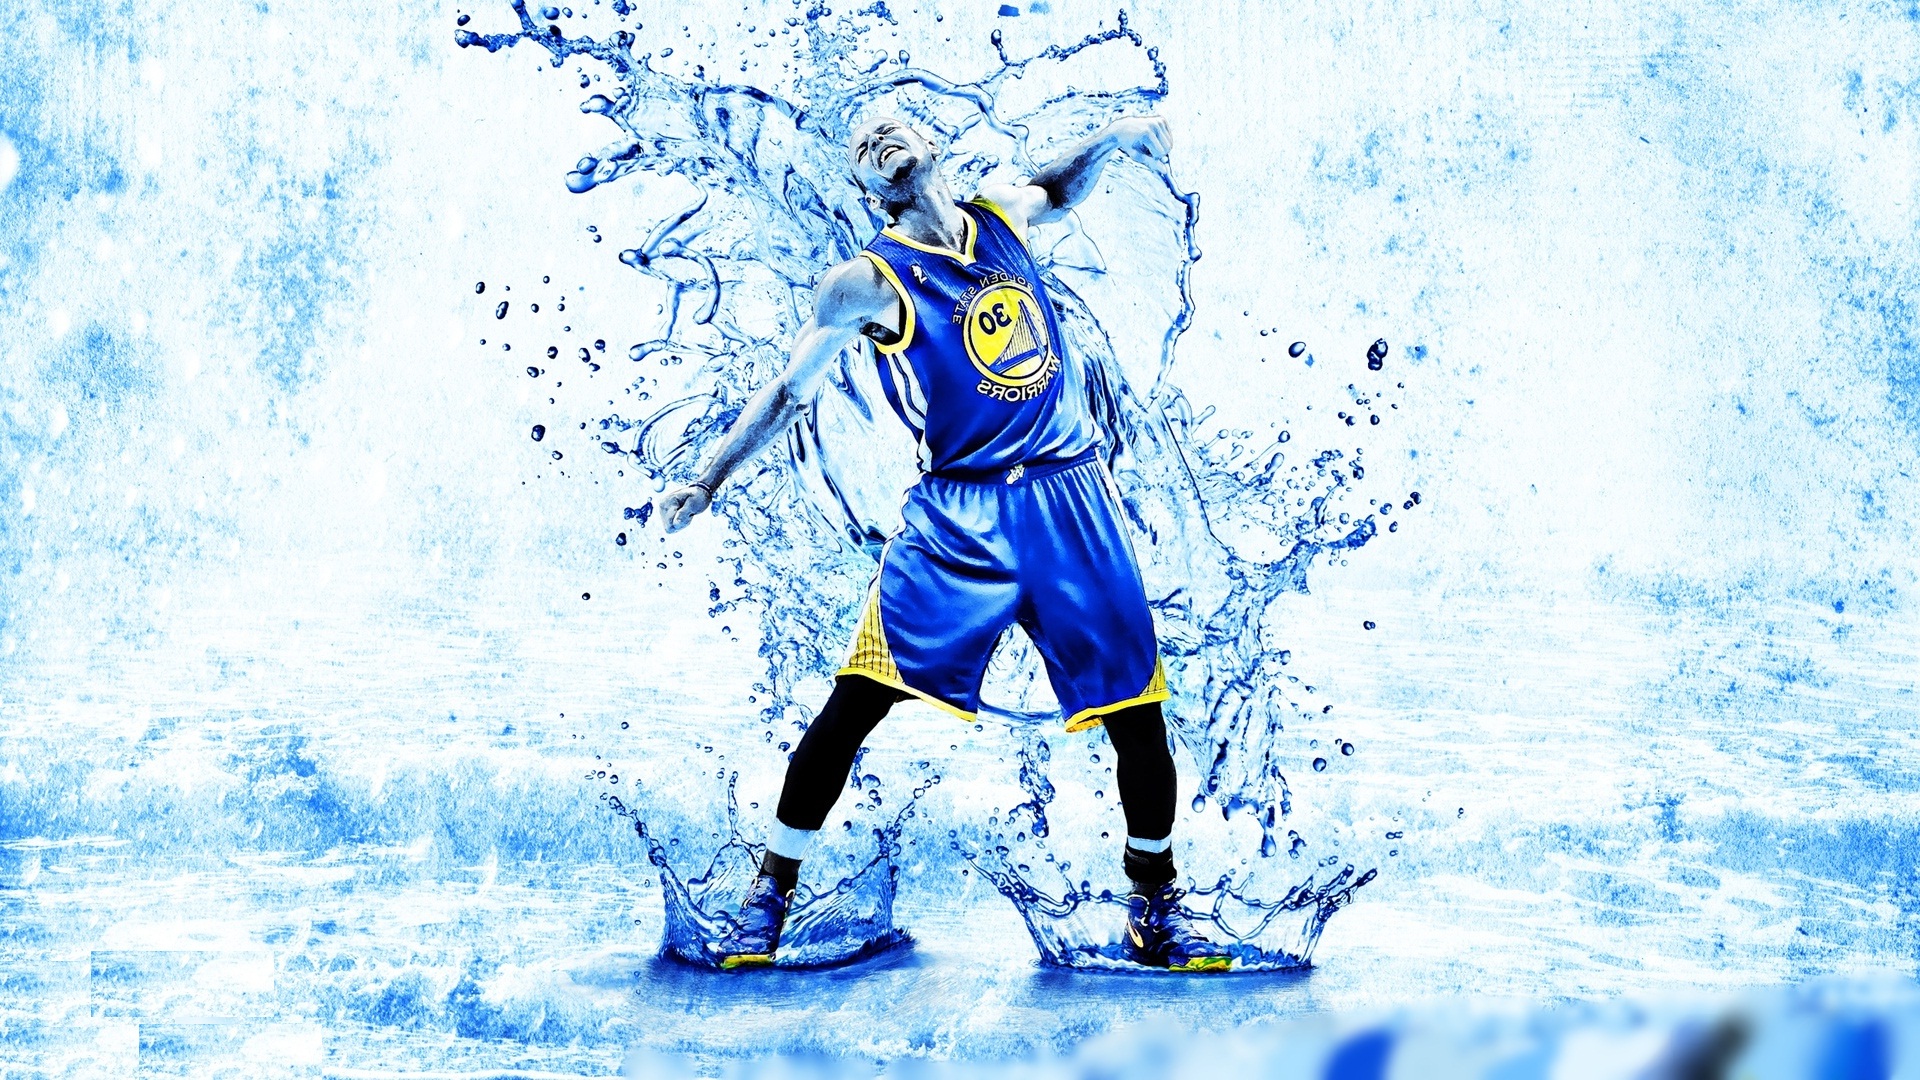 stephen curry wallpaper,player,football player,graphic design,illustration,sports equipment